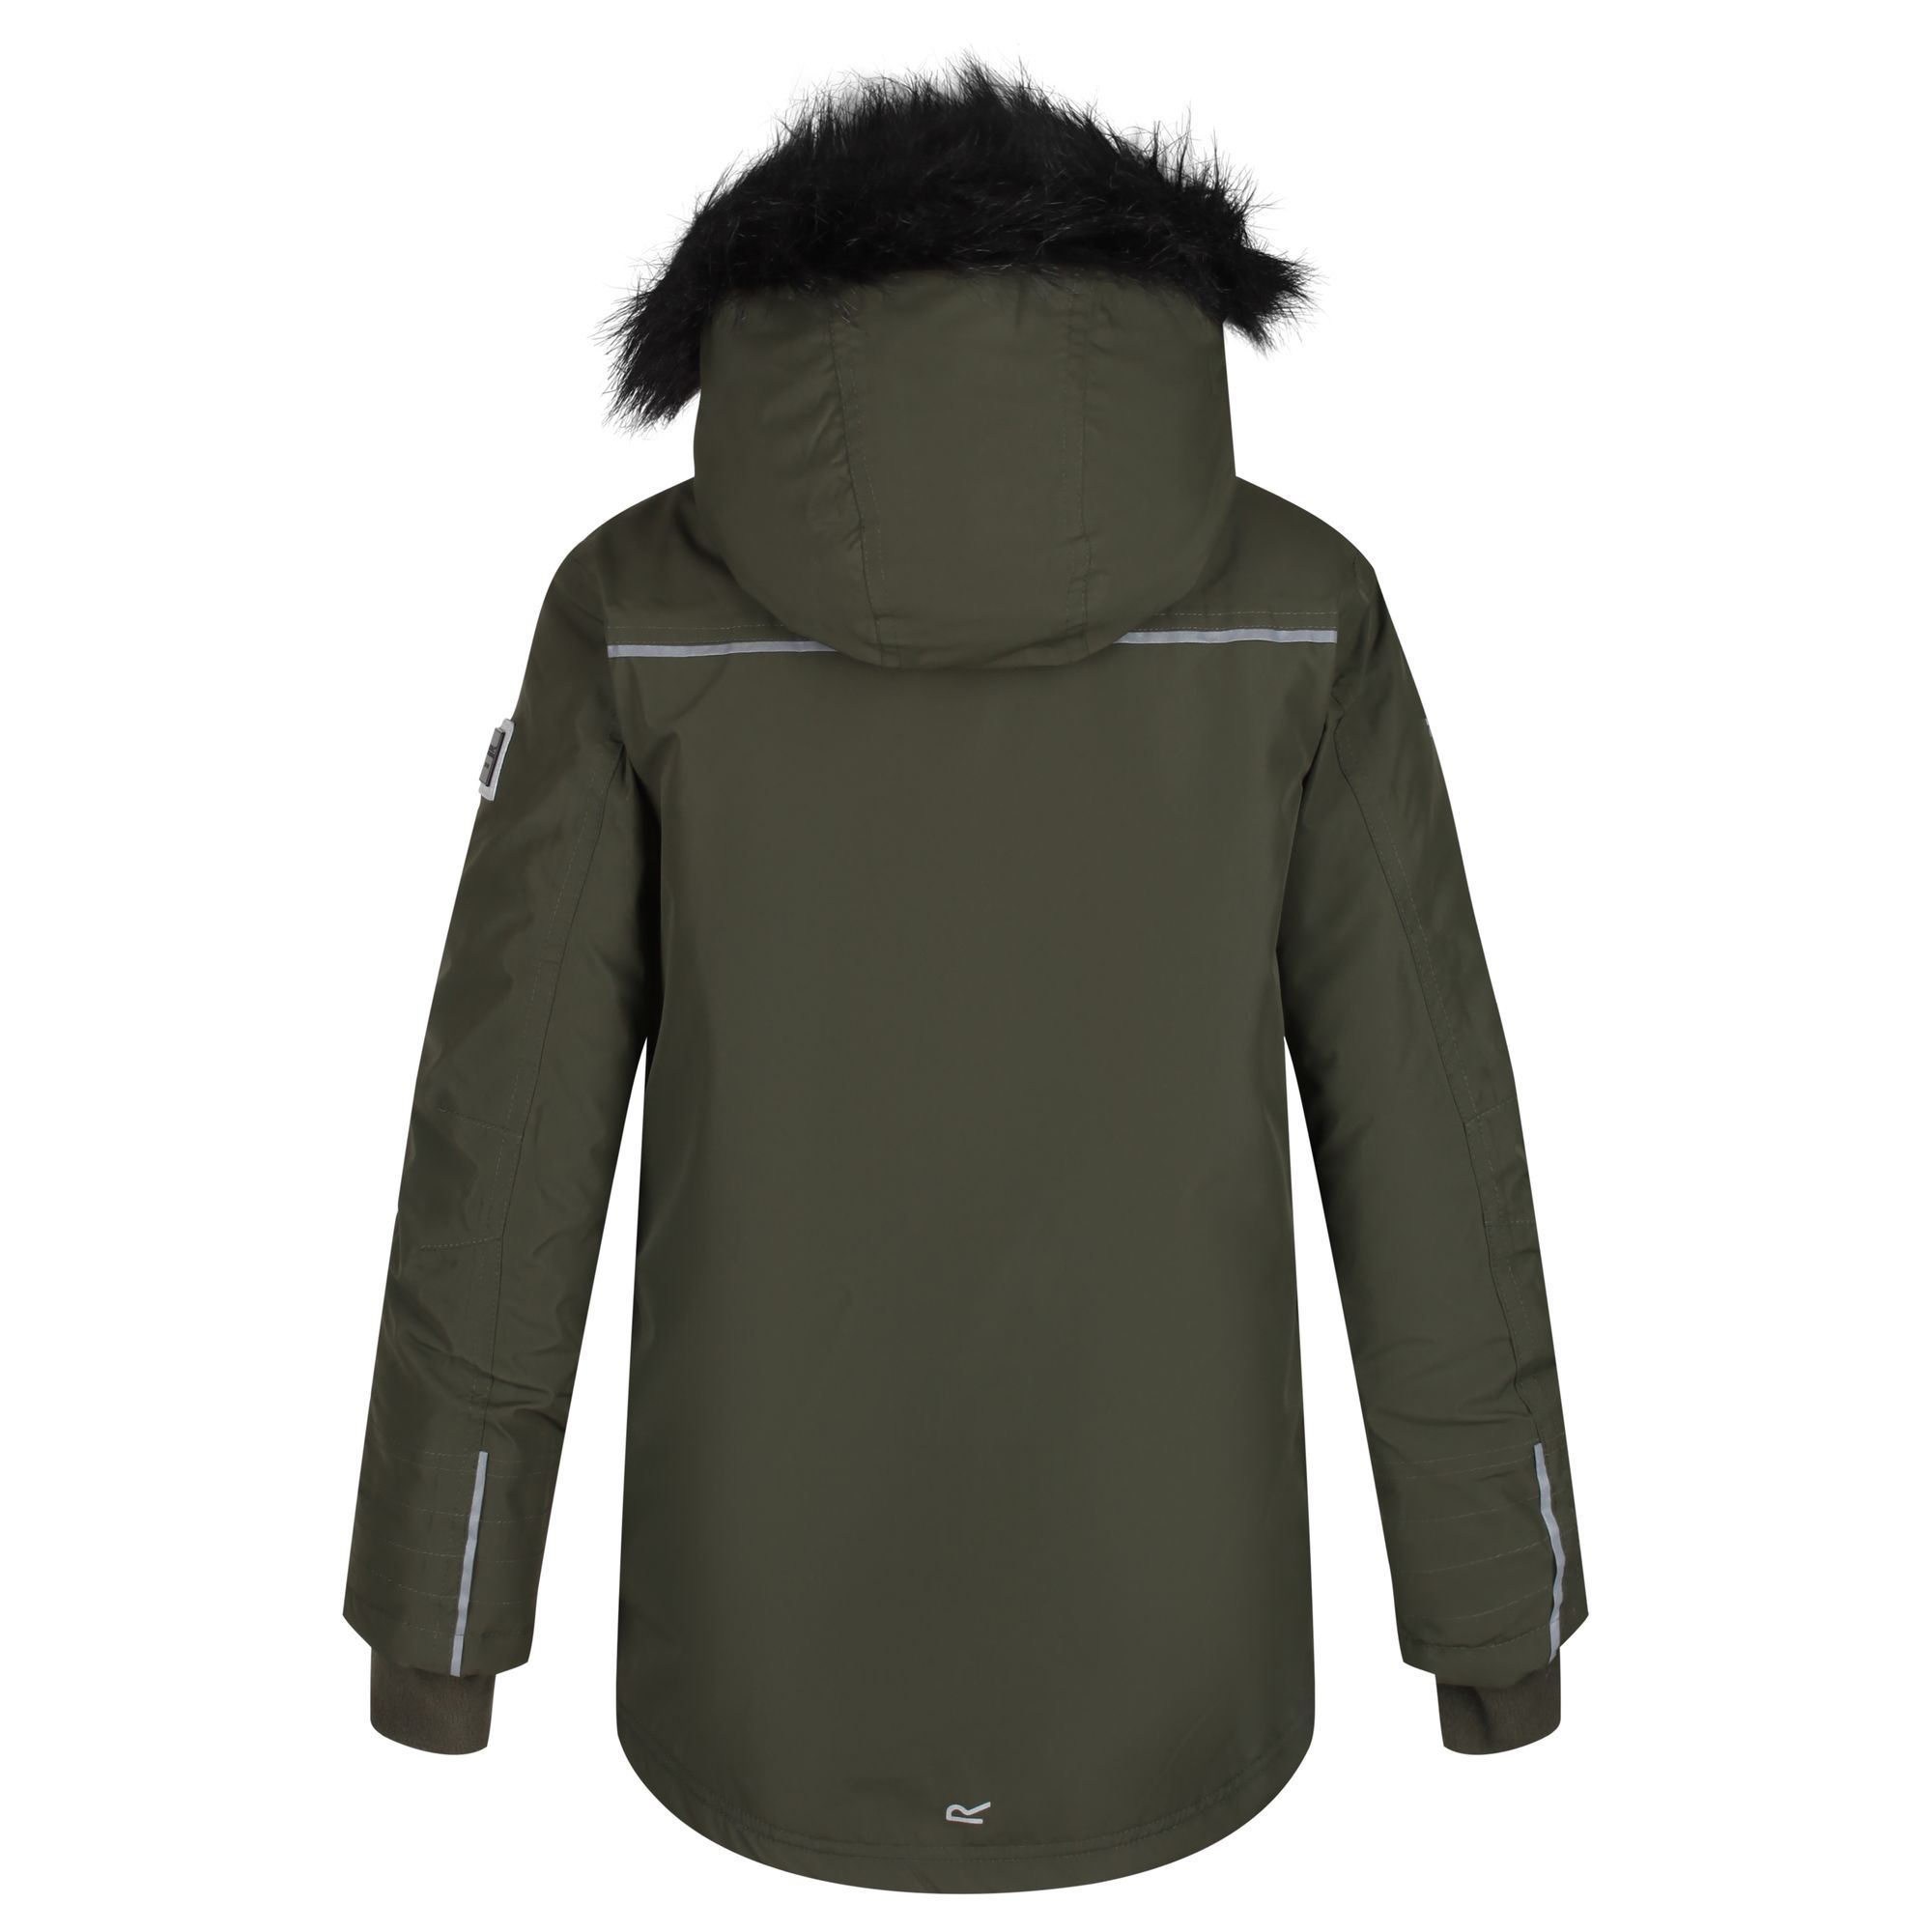 Material: 100% polyester. Isotex 5000 polyester pongee fabric. Polyester lining with strategic warm fleece panels. Waterproof and breathable. Breathability rating 5,000g/m2/24hrs. Taped seams. Thermoguard insulation. Grown on hood with faux fur trim. 2 handwarmer pockets to chest. 2 lower patch pockets with handwarmer pockets behind. Internal stormcuffs. Reflective trim. With the Regatta Outdoors badge on the left sleeve. Size (height/chest): (2 Years) 92cm/53-55cm, (3-4 Years) 98-104cm/55-57cm, (5-6 Years) 110-116cm/59-61cm, (7-8 Years) 122-128cm/63-67cm, (9-10 Years) 135-140cm/69-73cm, (11-12 Years) 146-152cm/75-79cm, (13 Years) 153-158cm/82cm, (14 Years) 164-170cm/86cm, (15-16 Years) 170-176cm/89-92cm.